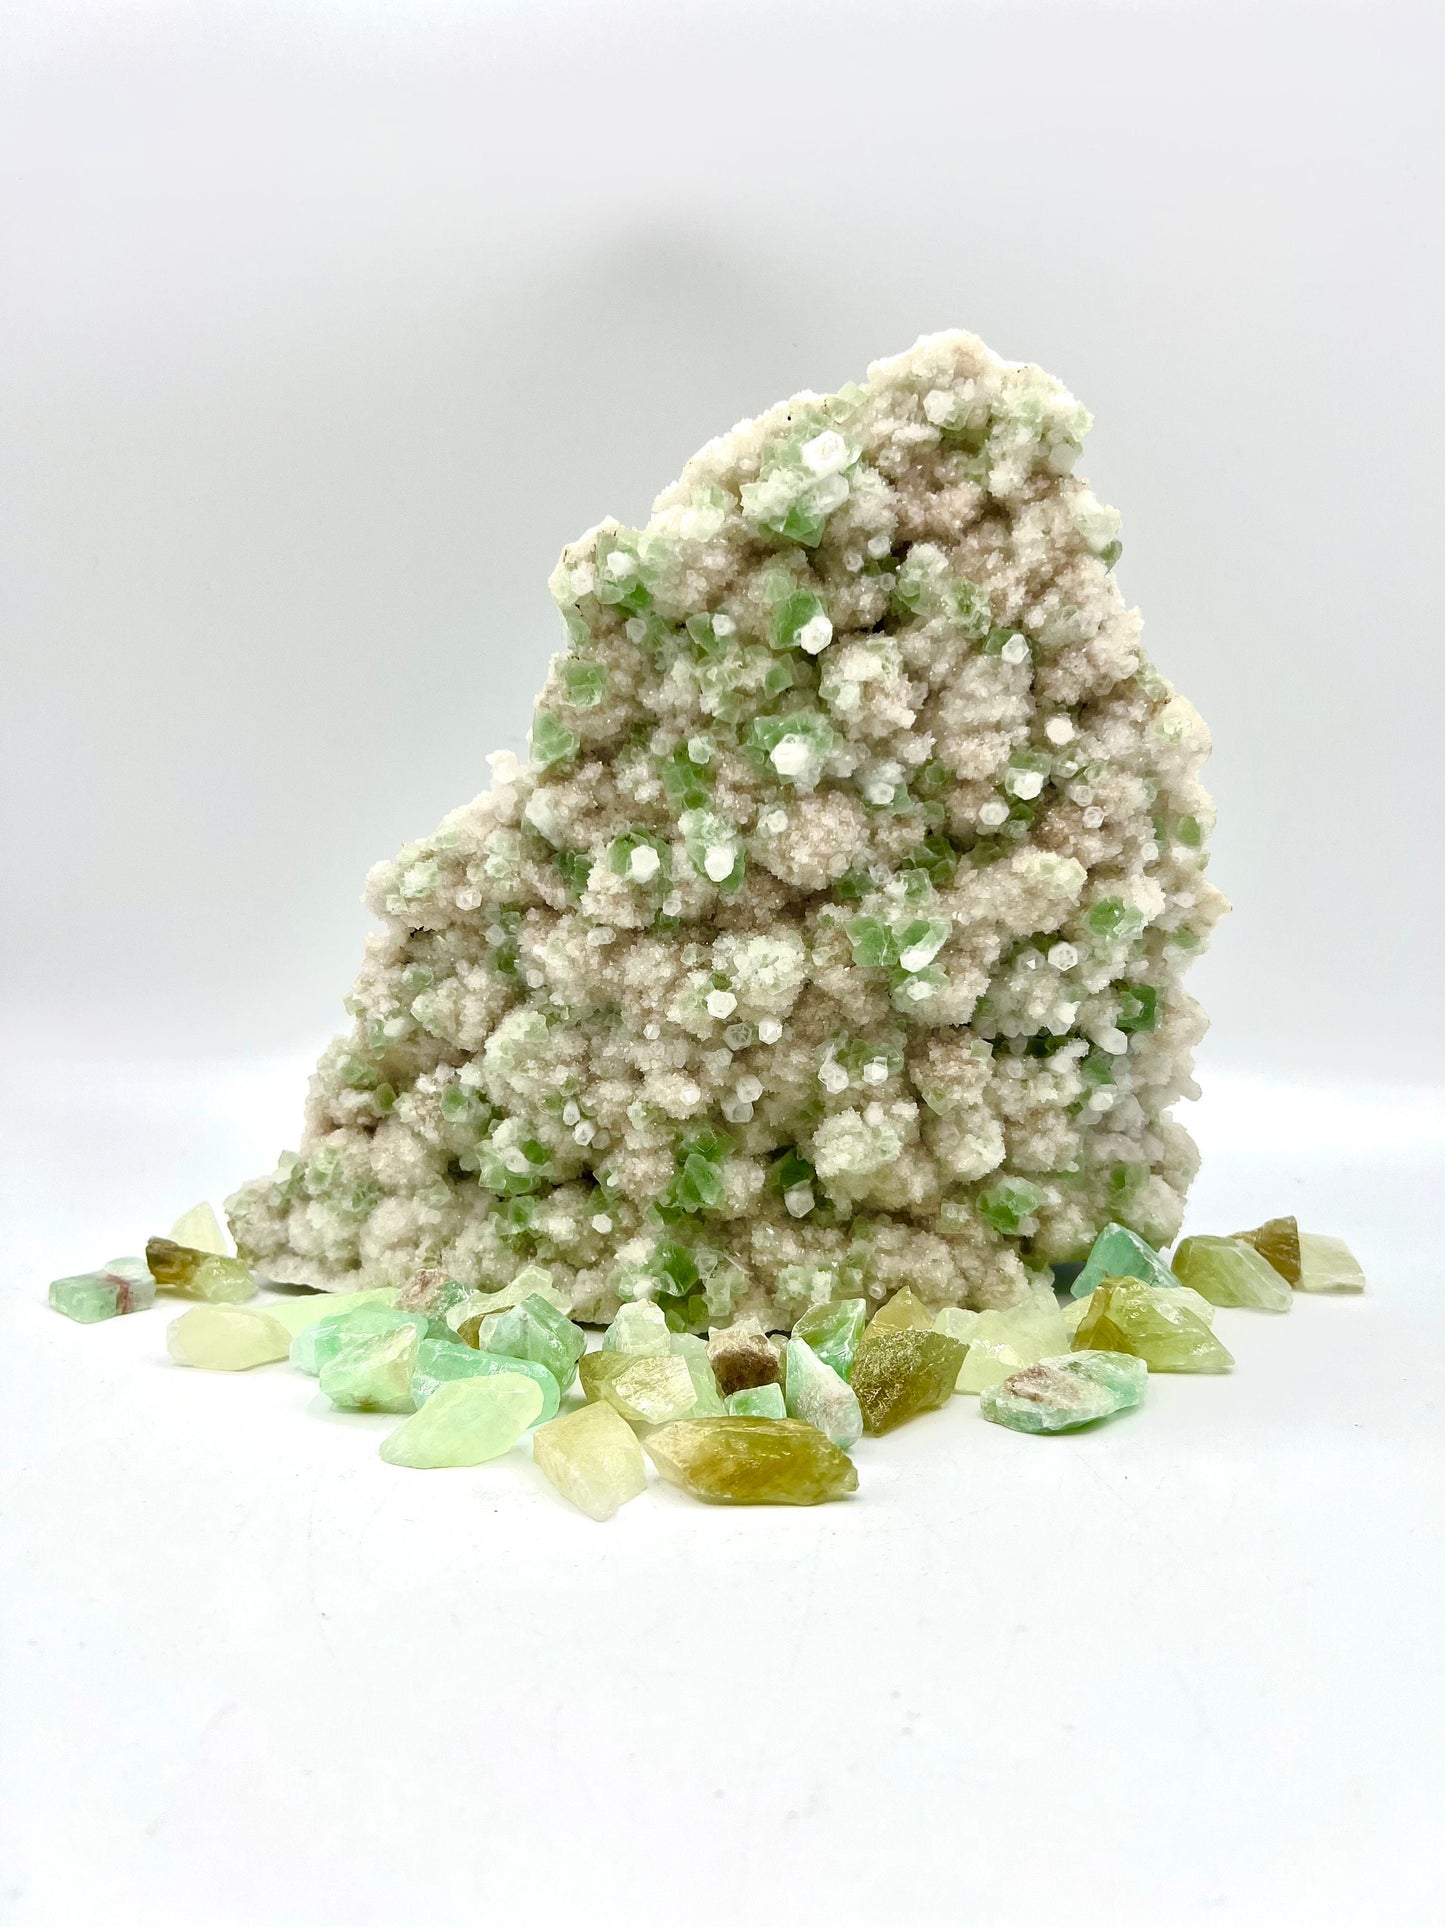 Large Green Apophyllite Cluster Crystal Rock for healing and bringing peace, harmony, and abundance in your life tabletop Gift